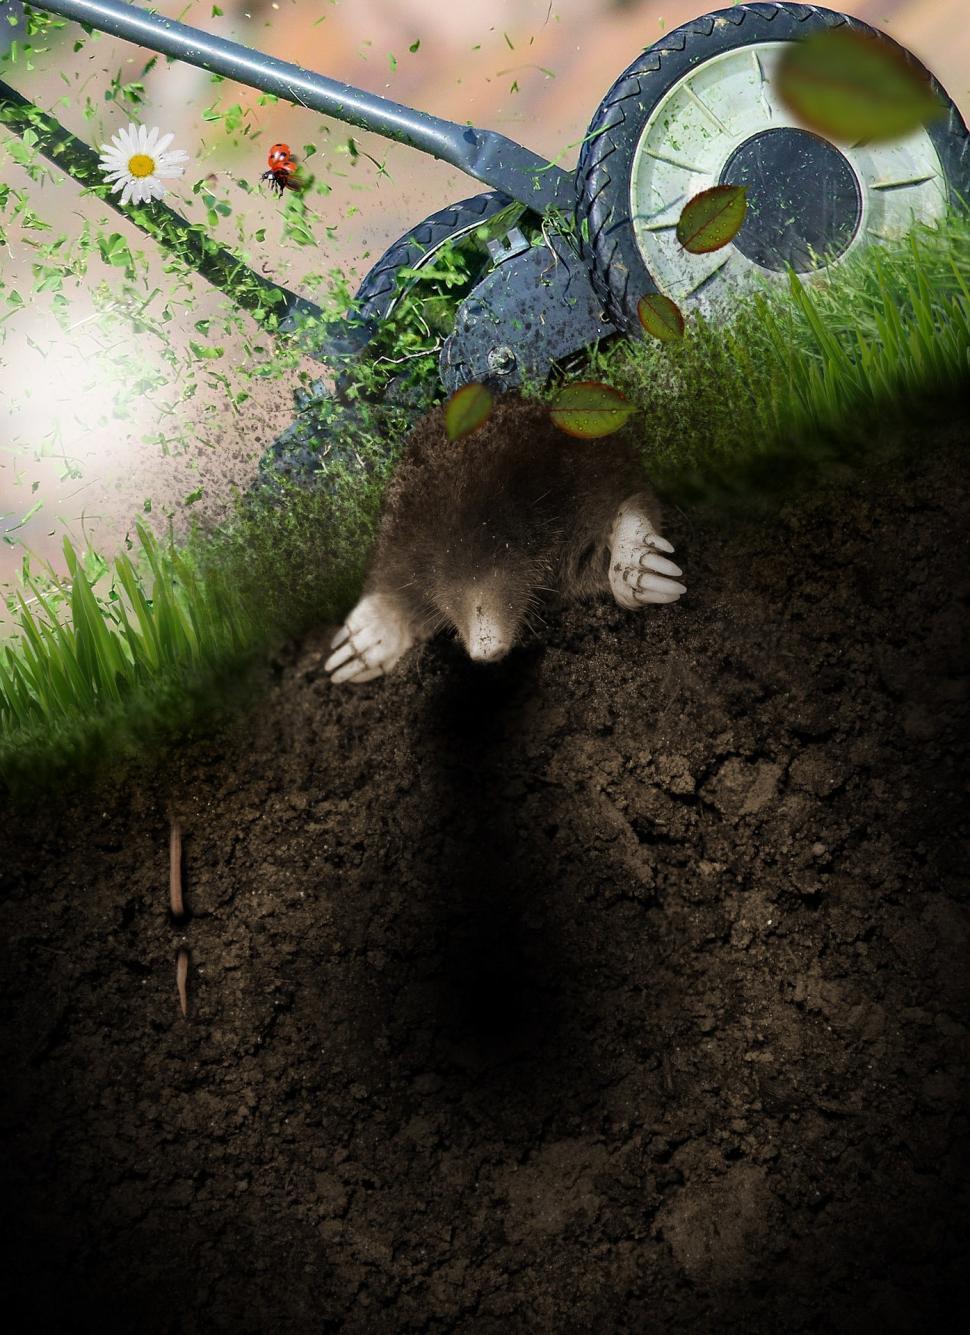 Free Image of Man Digging a Hole in the Ground 